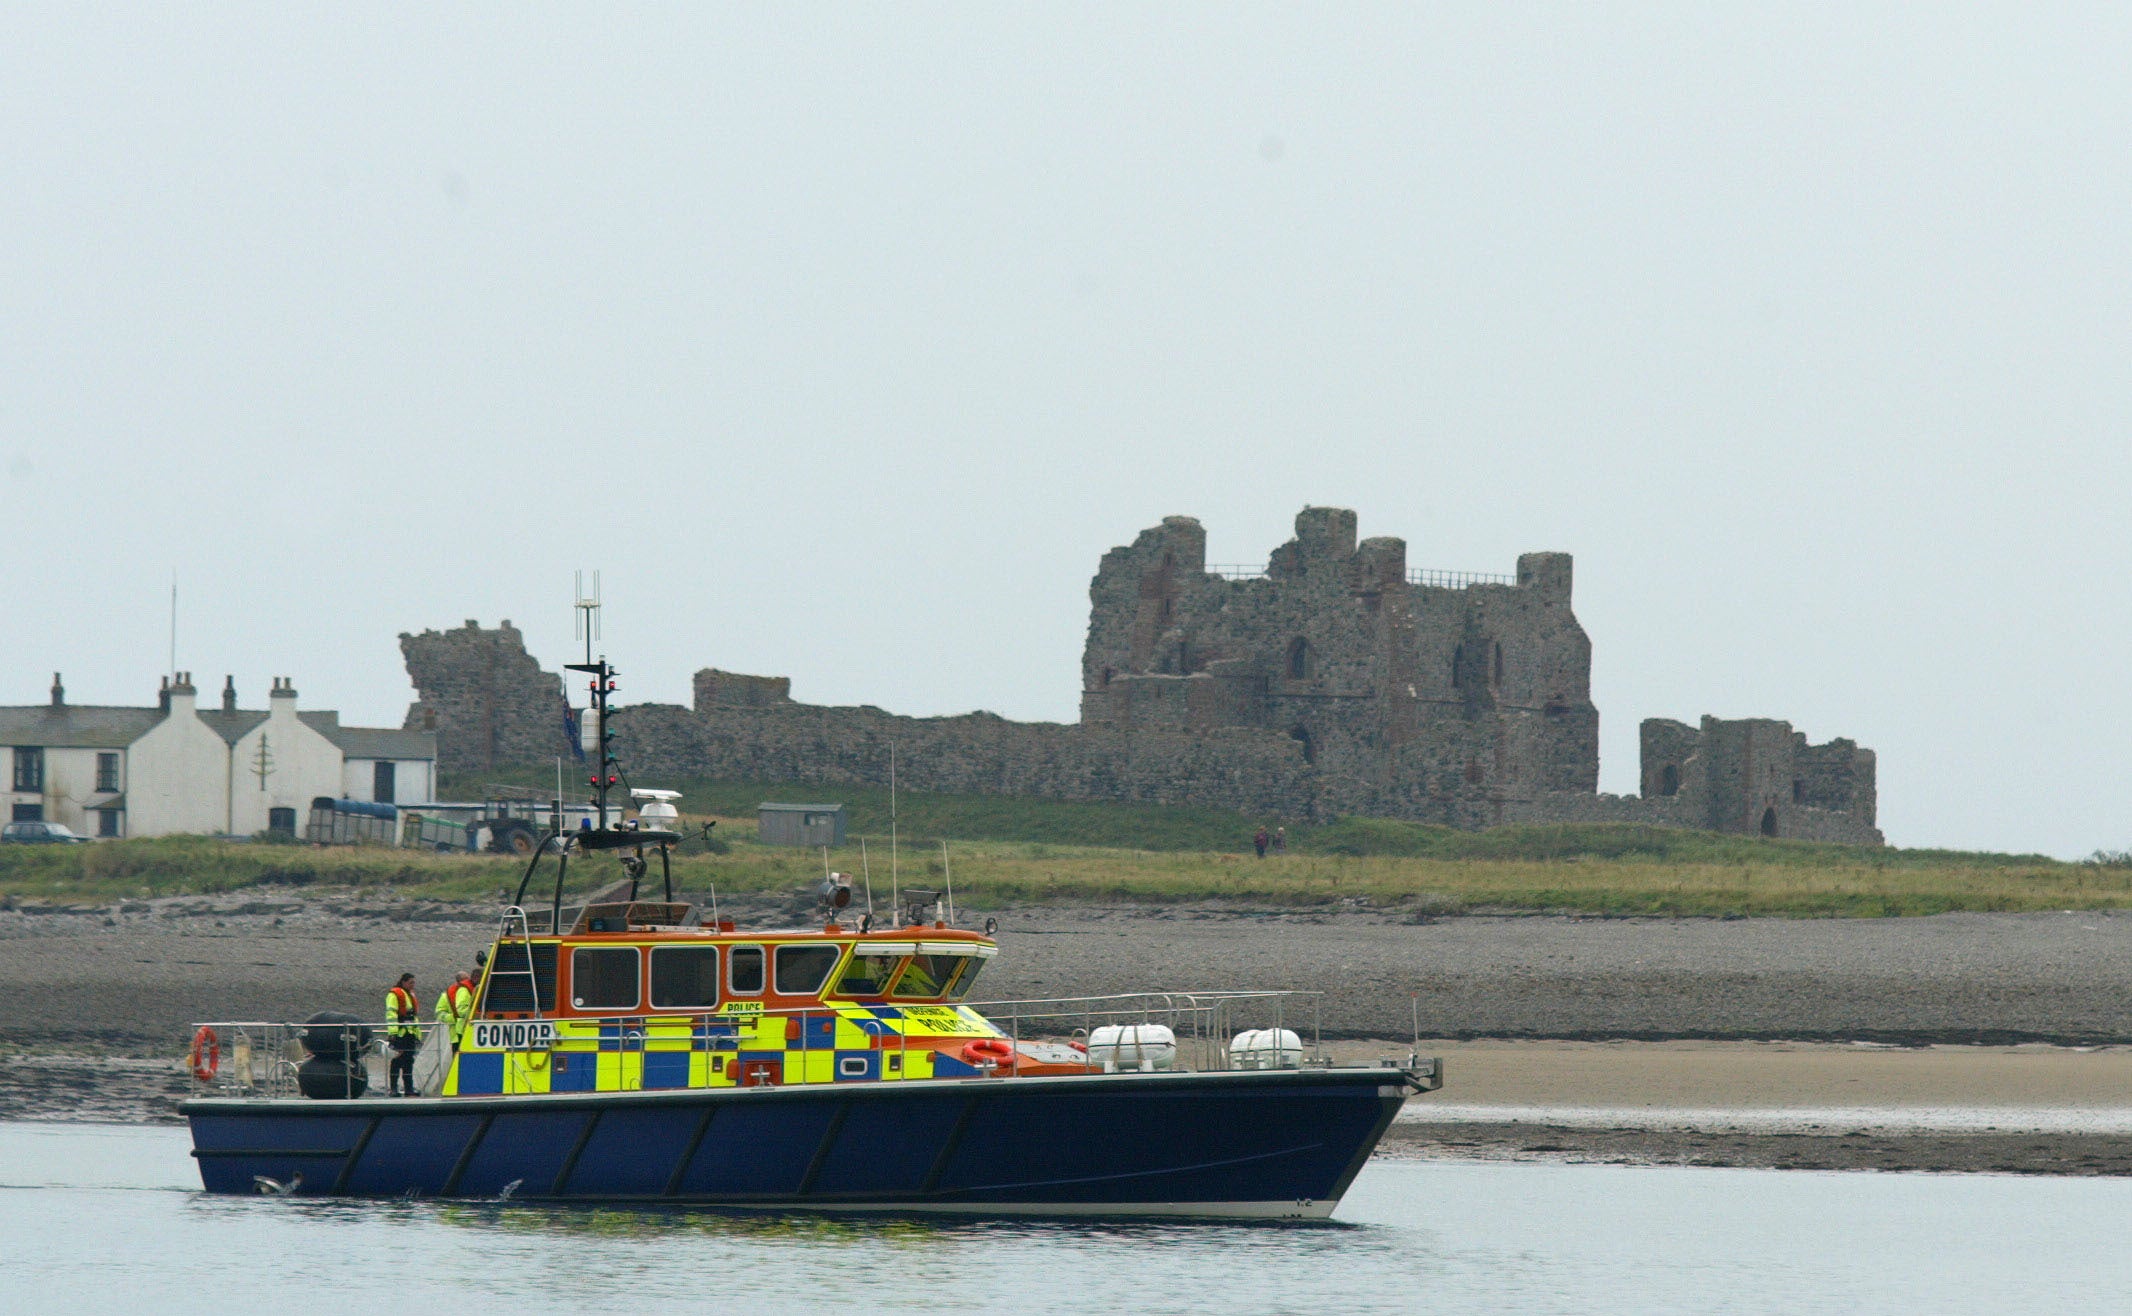 A police launch patrols the Walney Channel near Piel Castle near Barrow-in-Furness, Cumbria, ahead of tomorrow’s arrival of two ships carrying radioactive material for the Sellafield nuclear re-processing plant. * A fleet of up to 20 protesting boats, led by Greenpeace’s Rainbow Warrior, were in the south of the Irish Sea to highlight what they describe as the dangers of nuclear material.